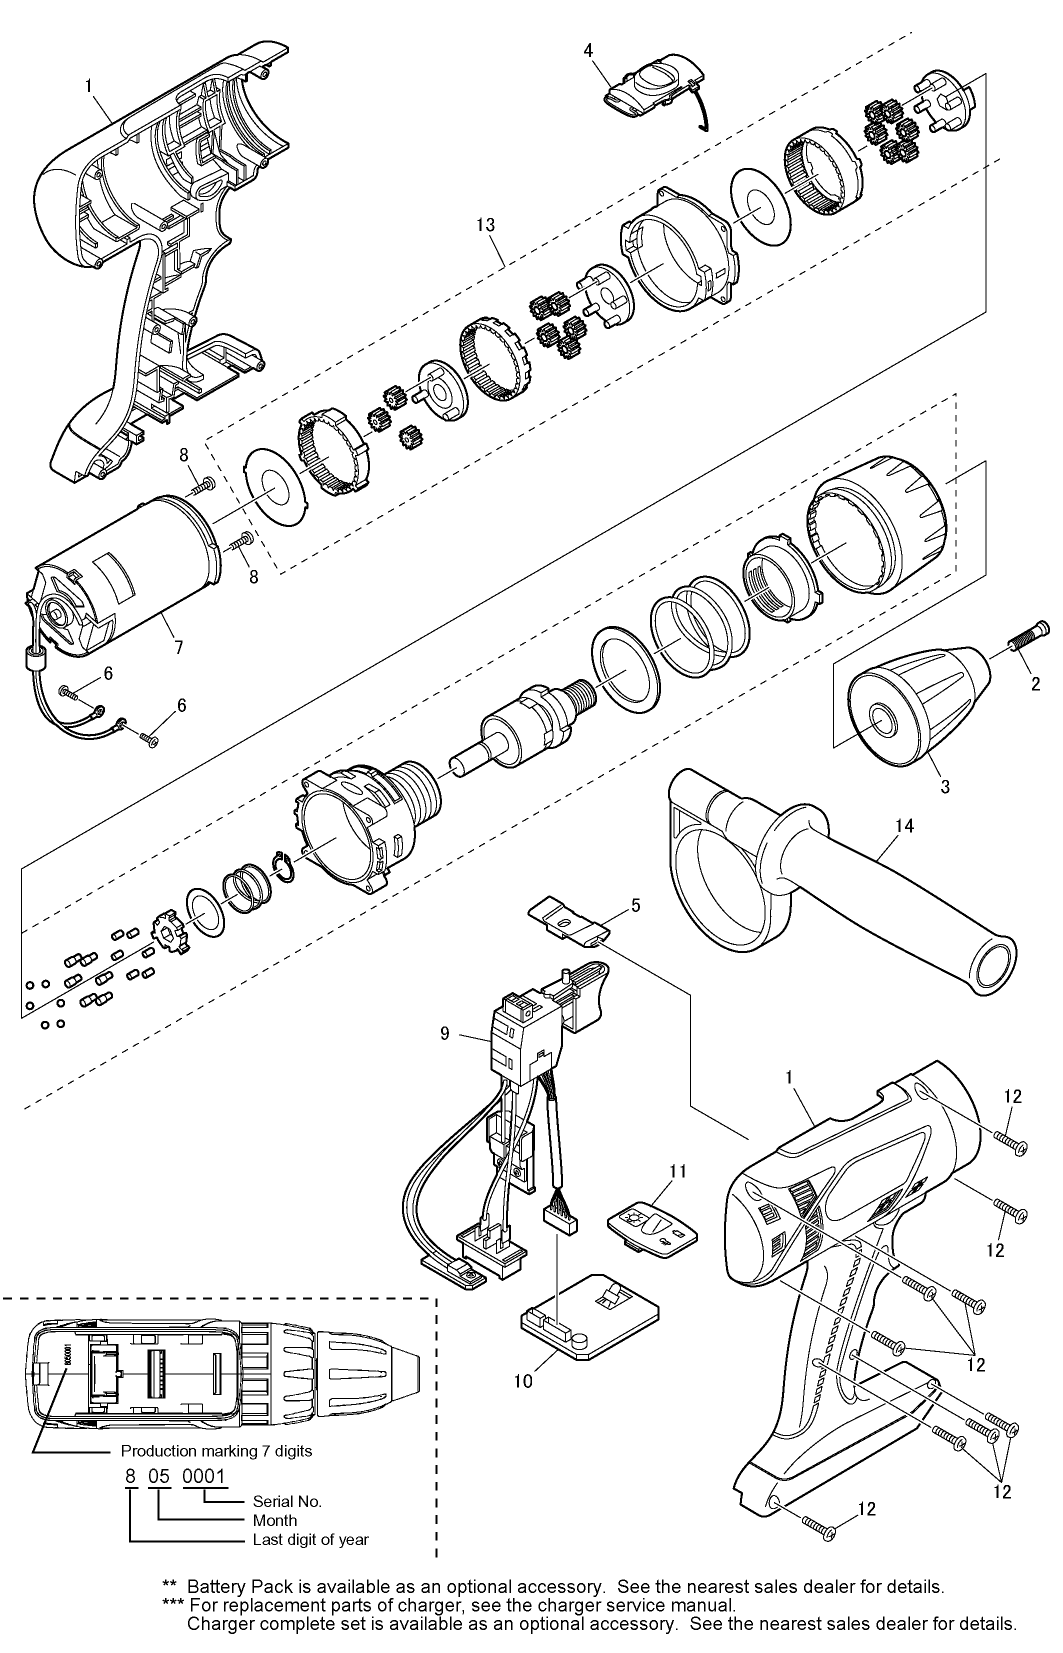 EY7960: Exploded View